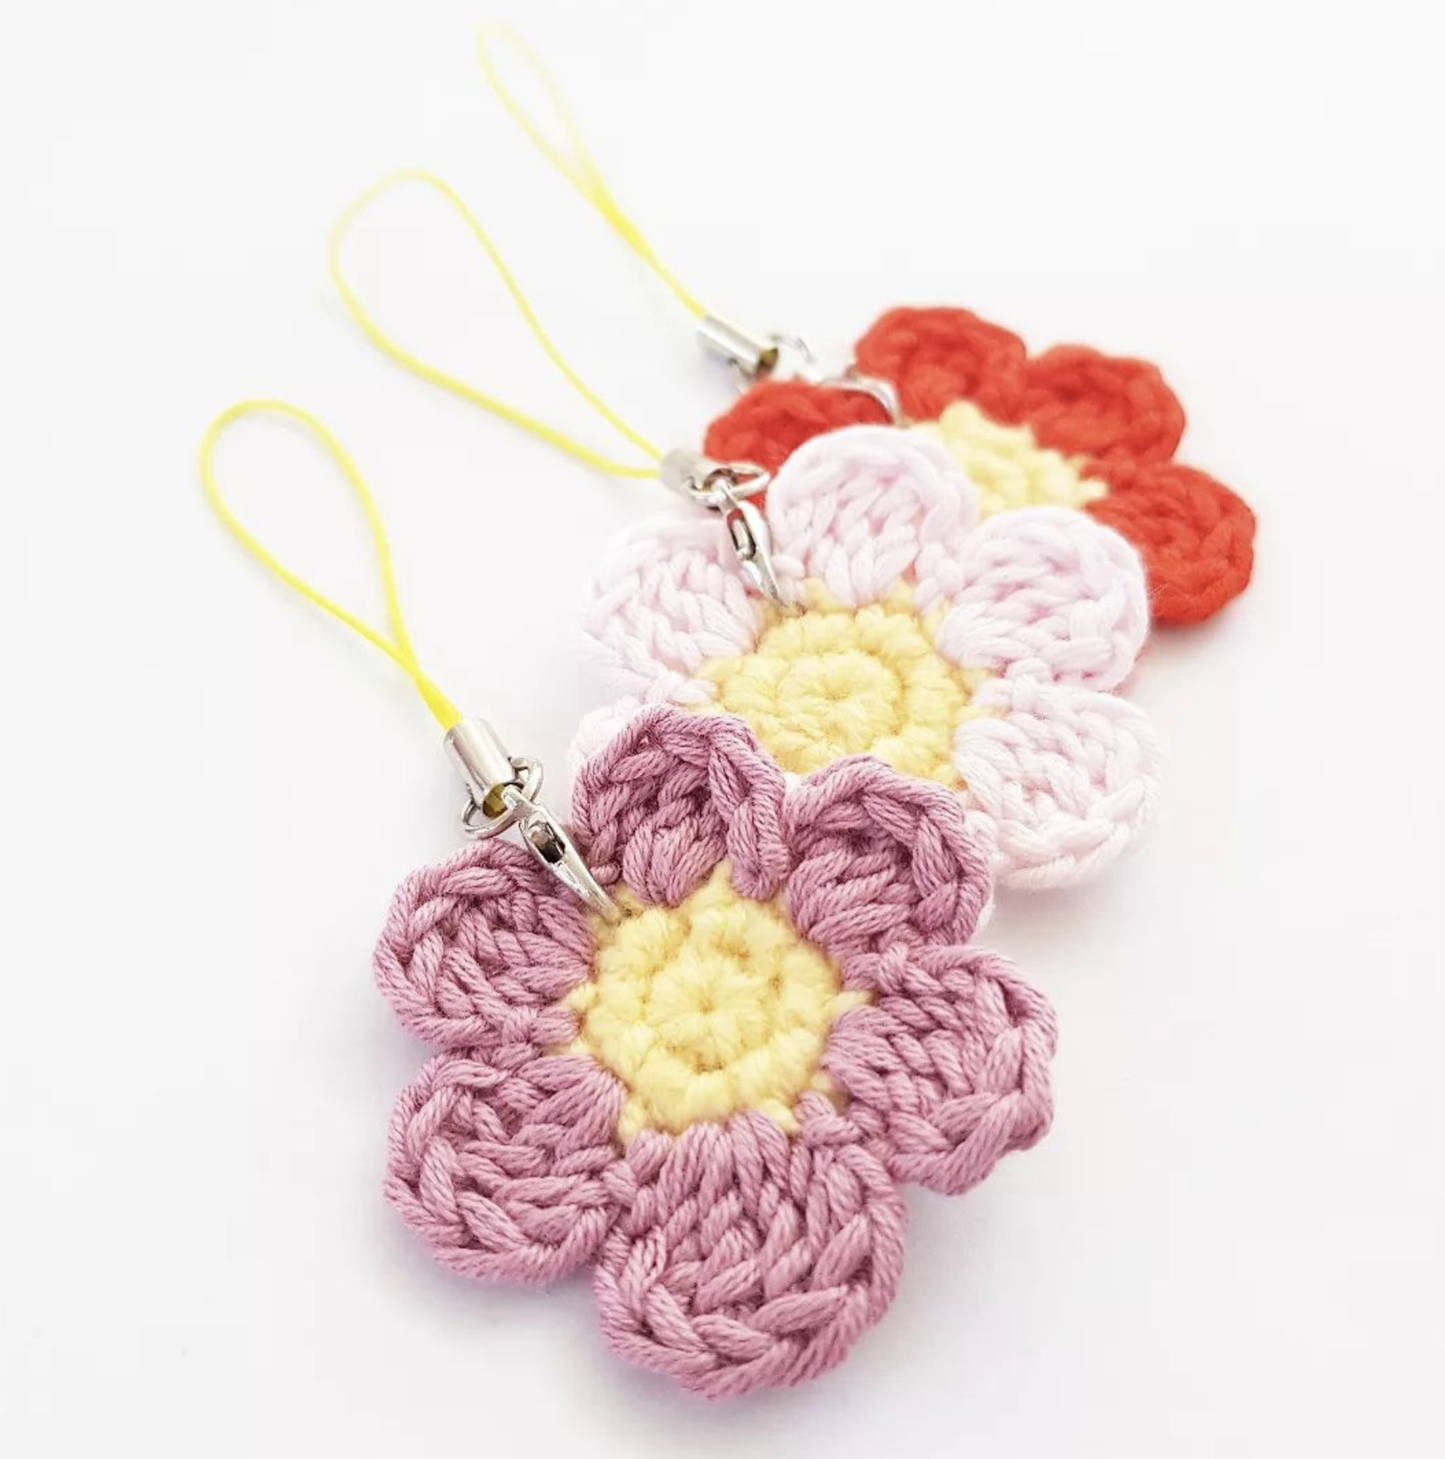 "Personalized Gift Ideas: Crochet Flower Keychains for Birthdays & More"